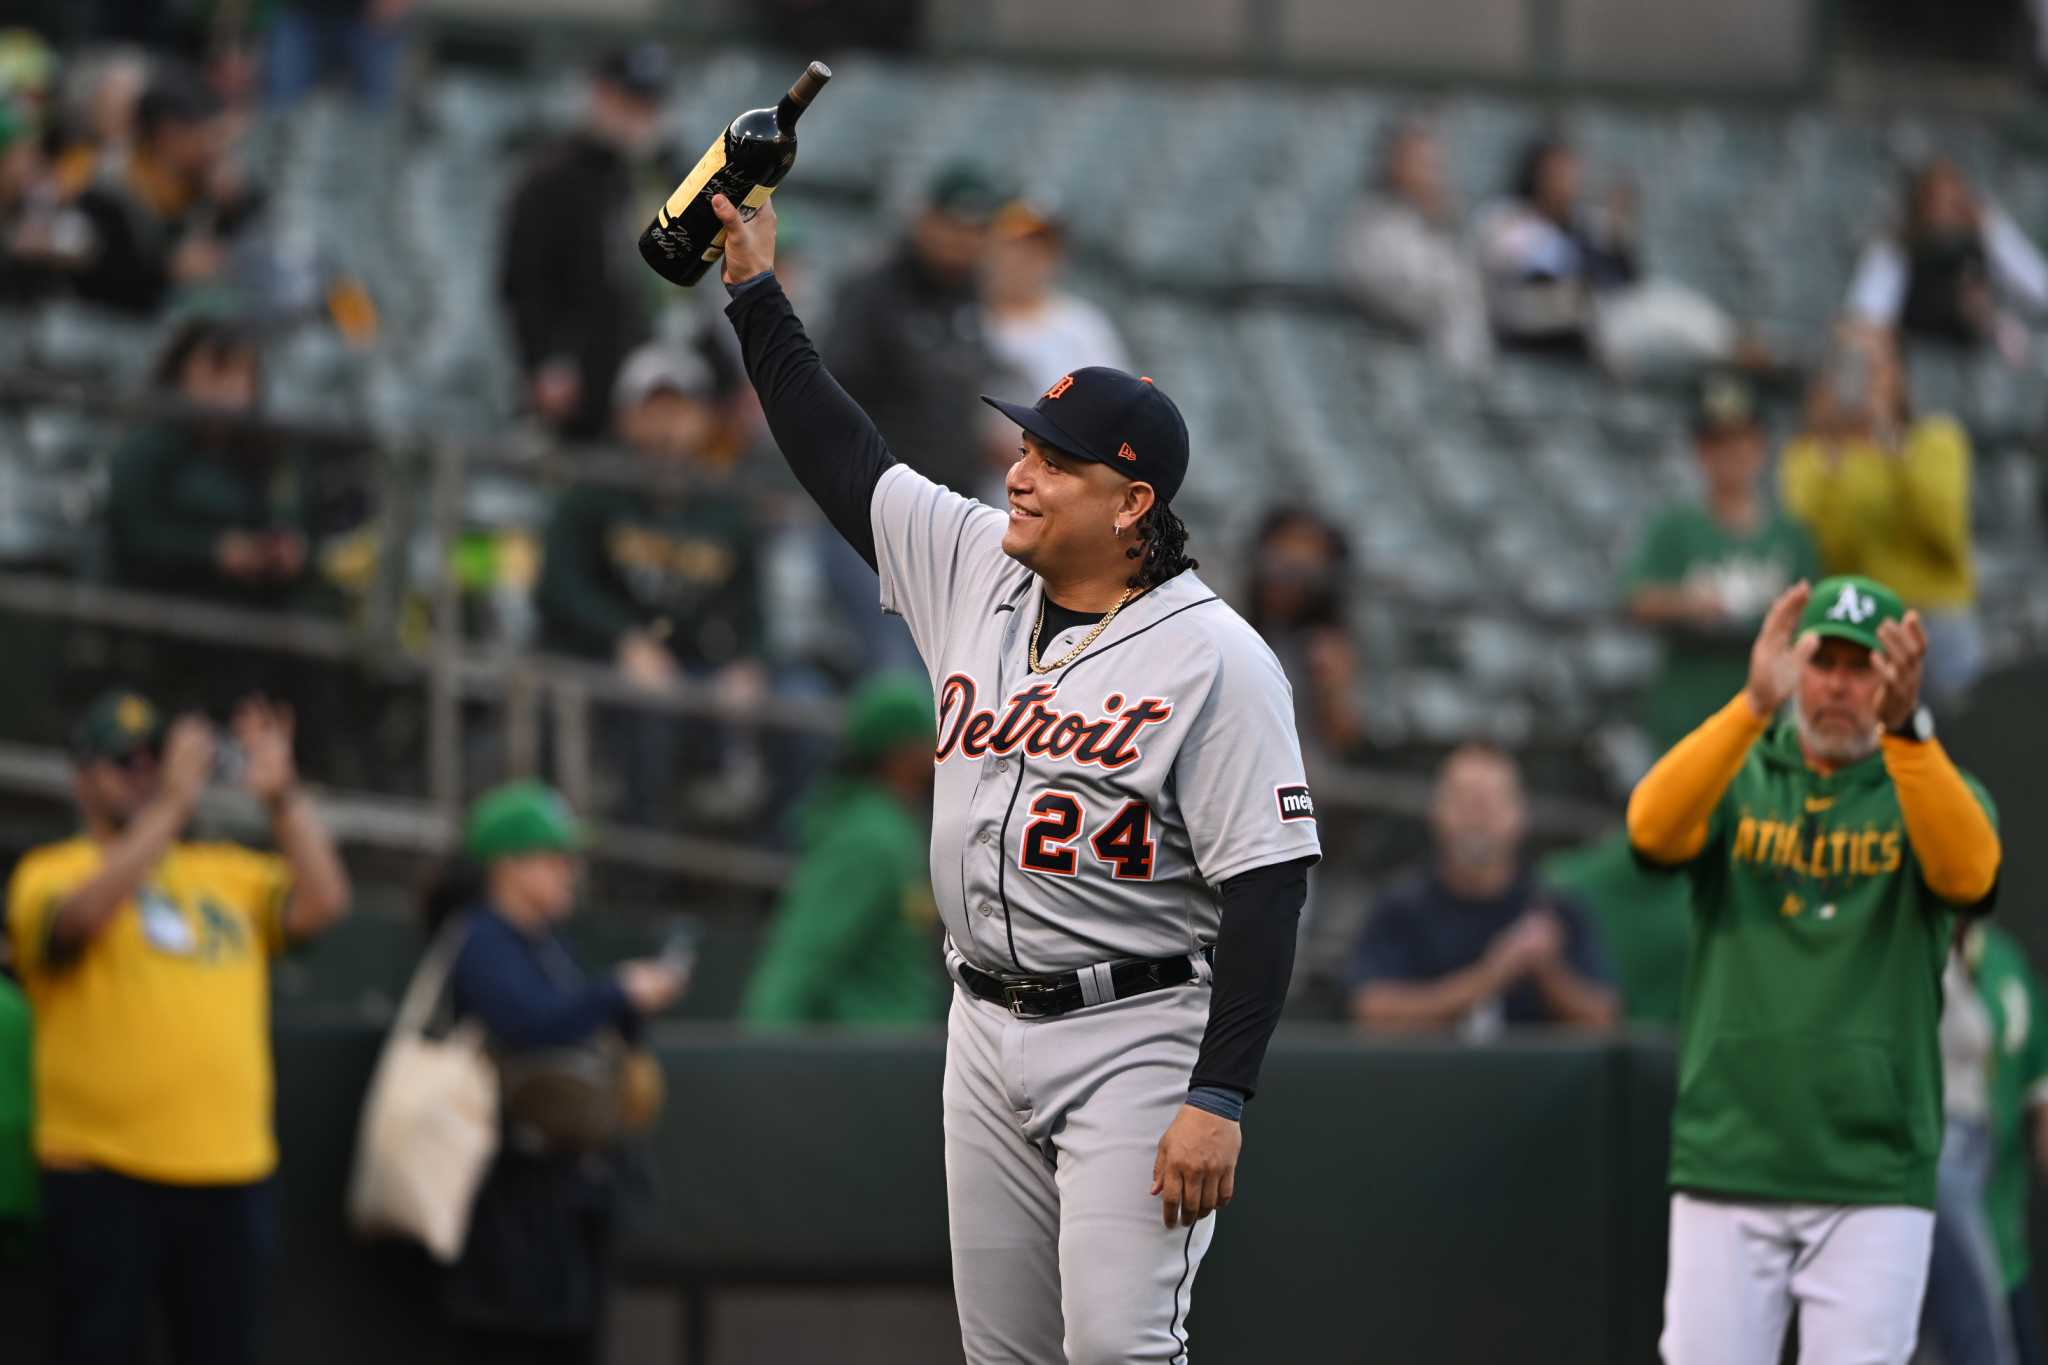 Oakland Athletics gifted Miguel Cabrera a cheap bottle of wine